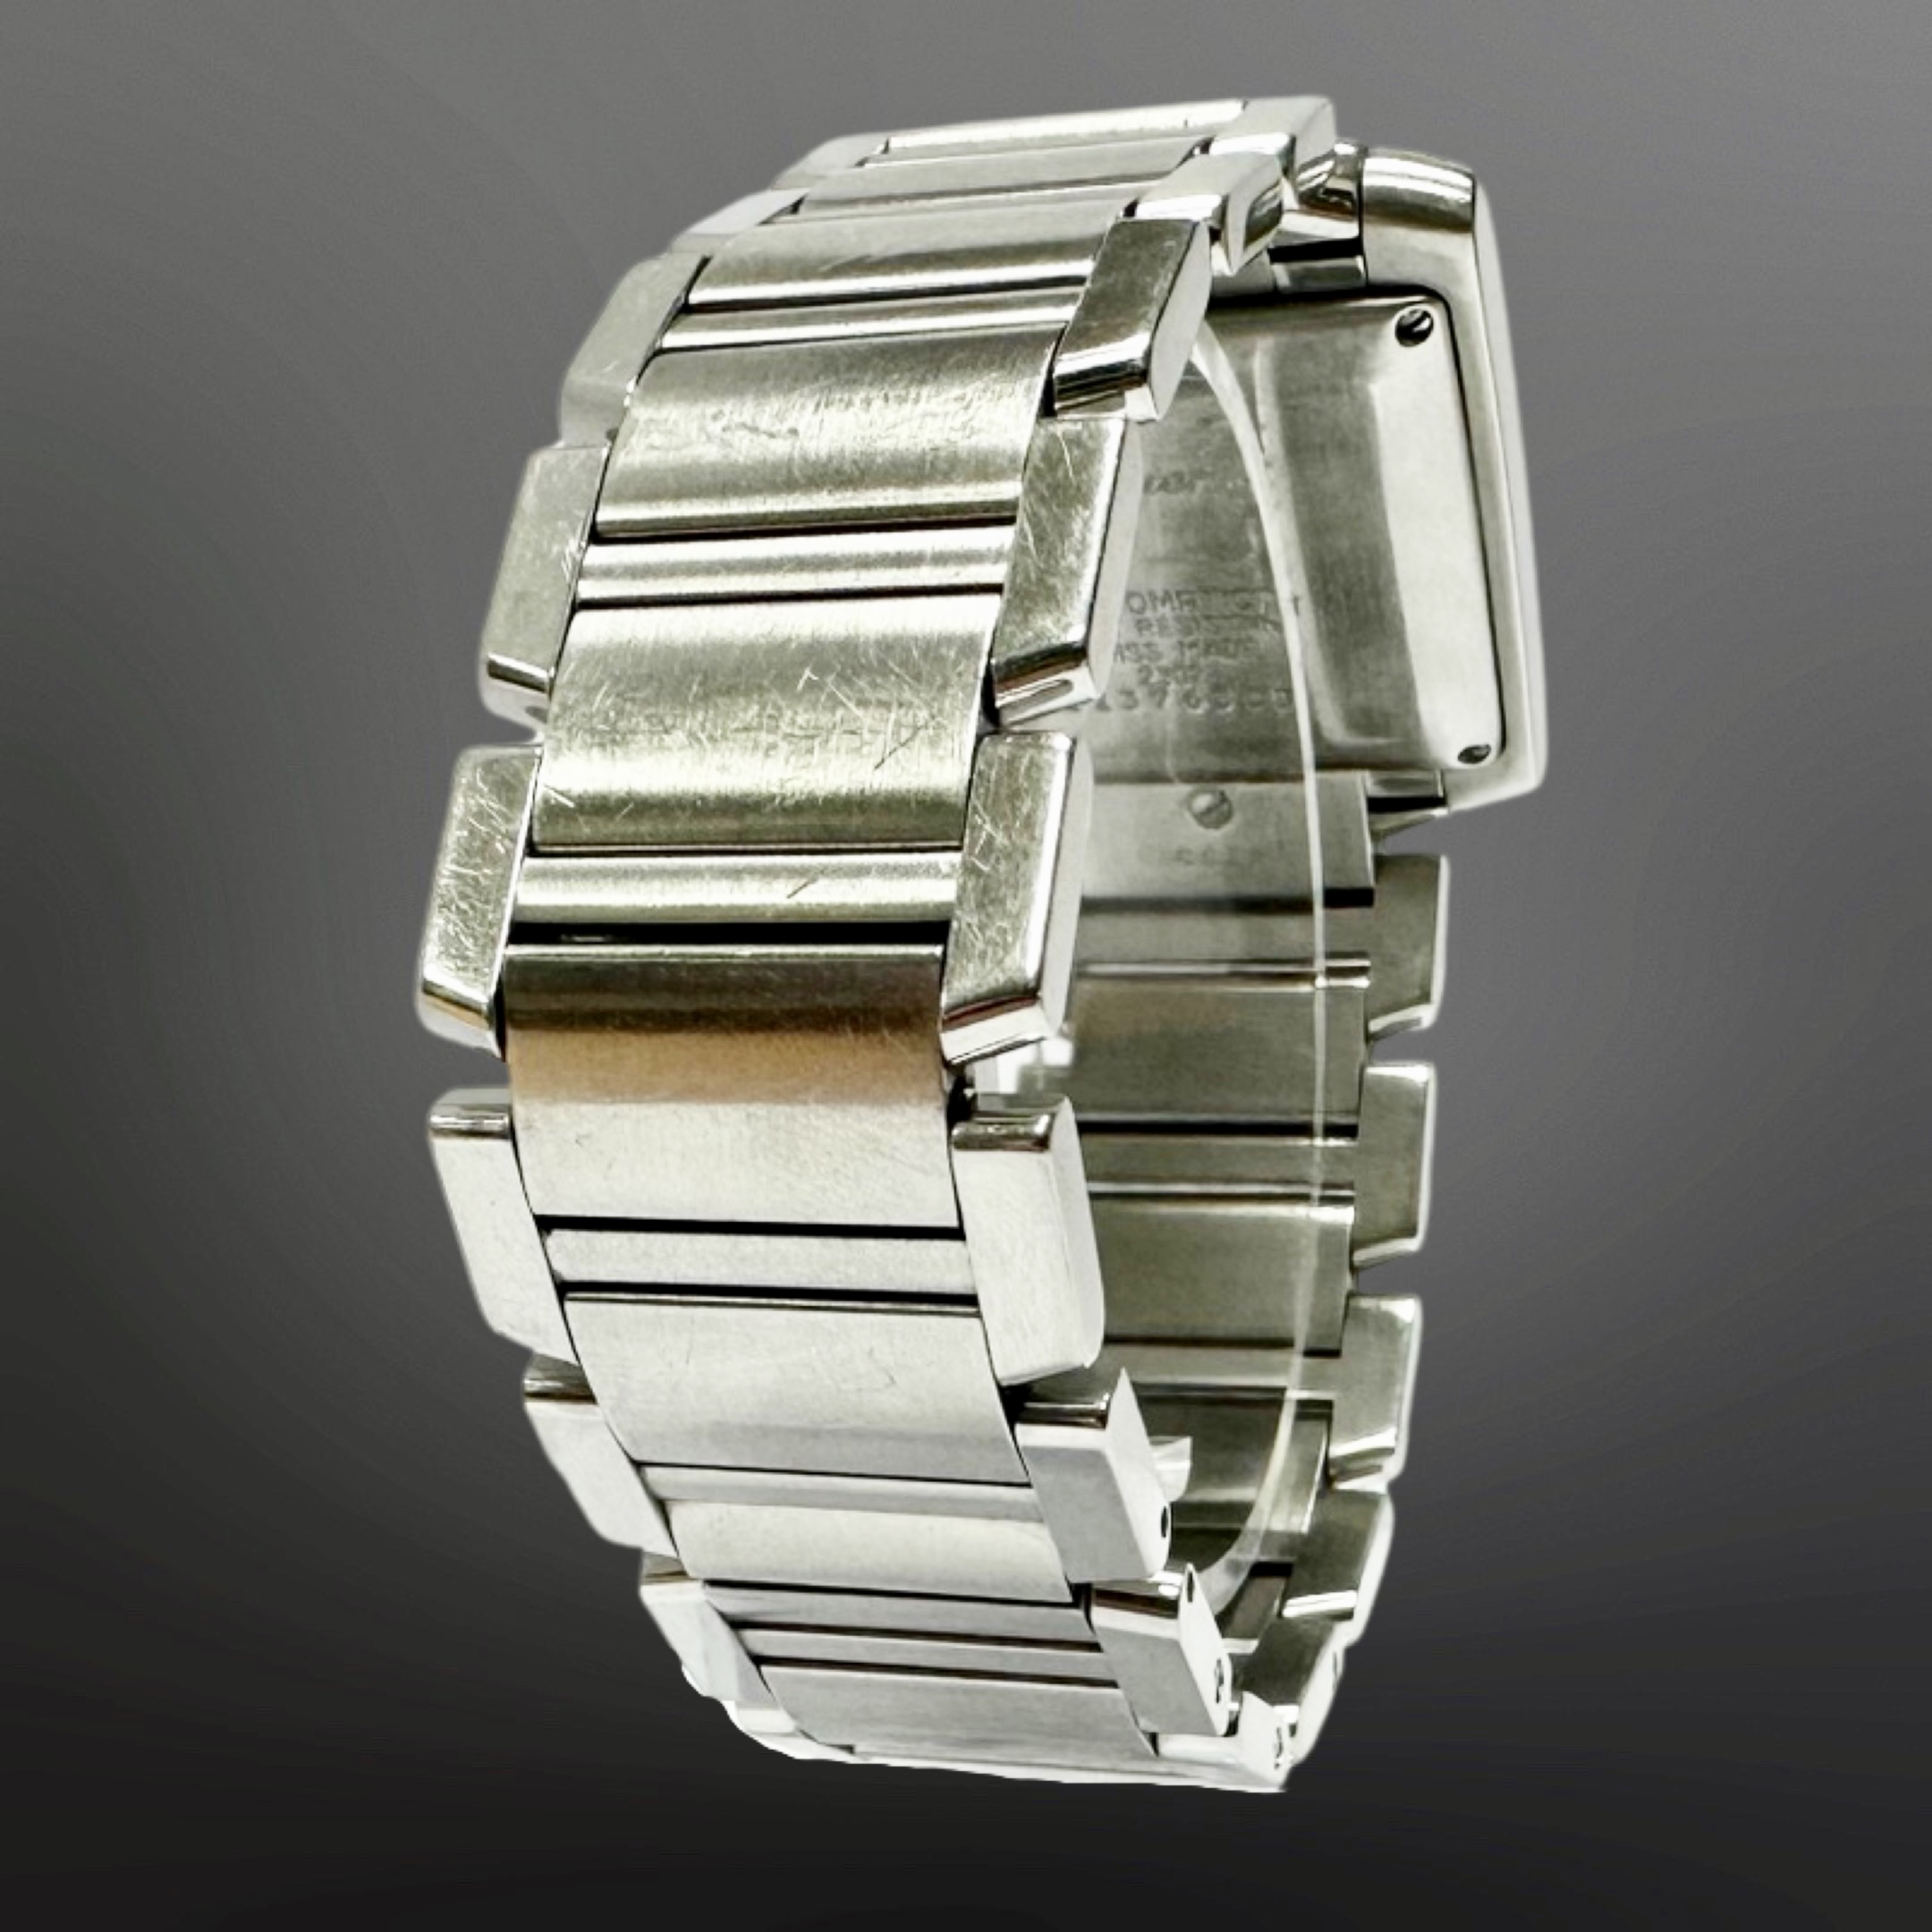 Cartier Tank Francaise stainless steel automatic wristwatch, - Image 3 of 6